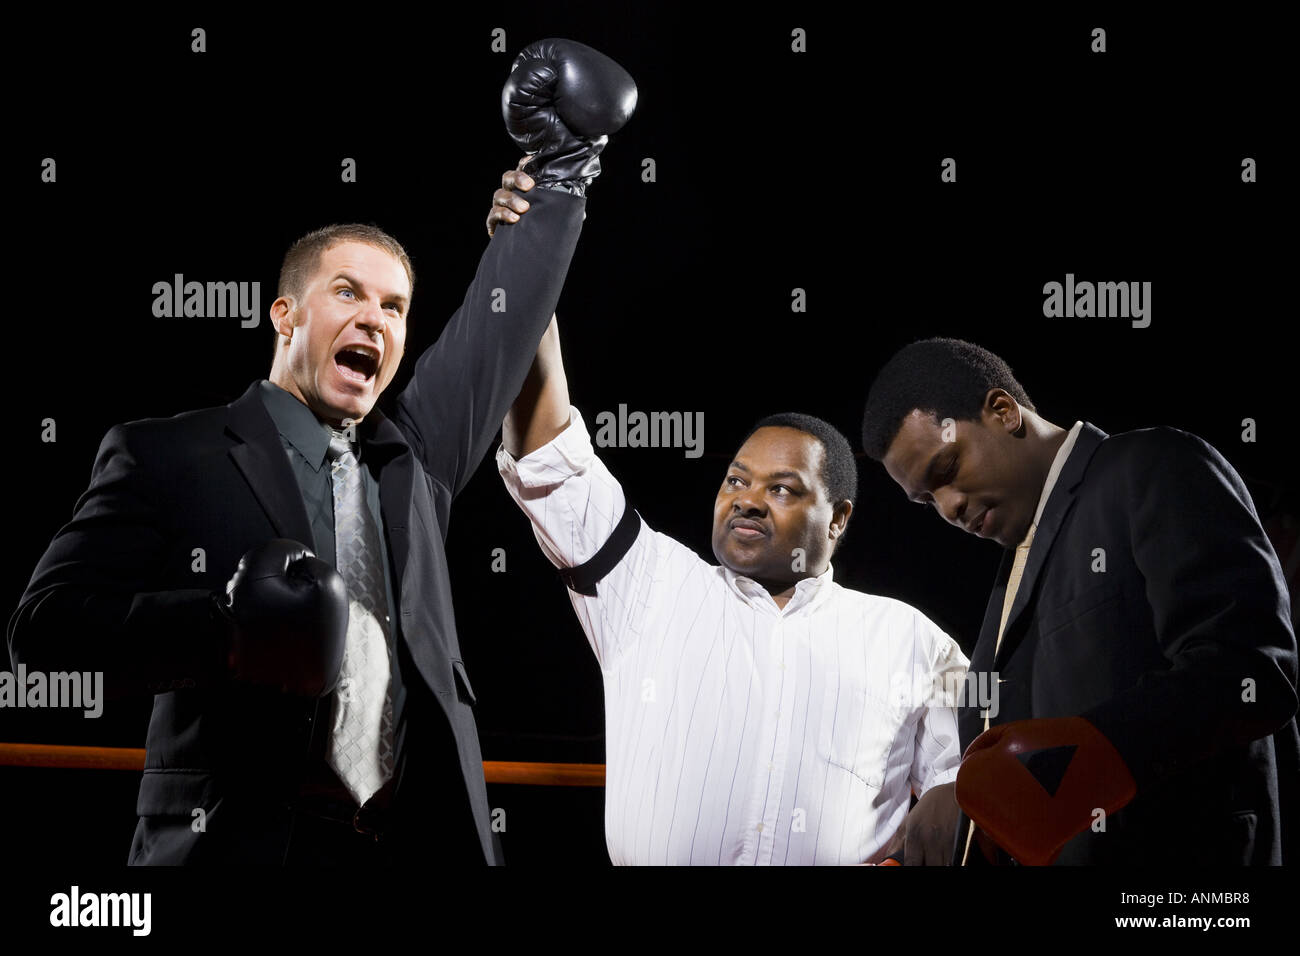 Referee declaring the winner of a boxing match Stock Photo